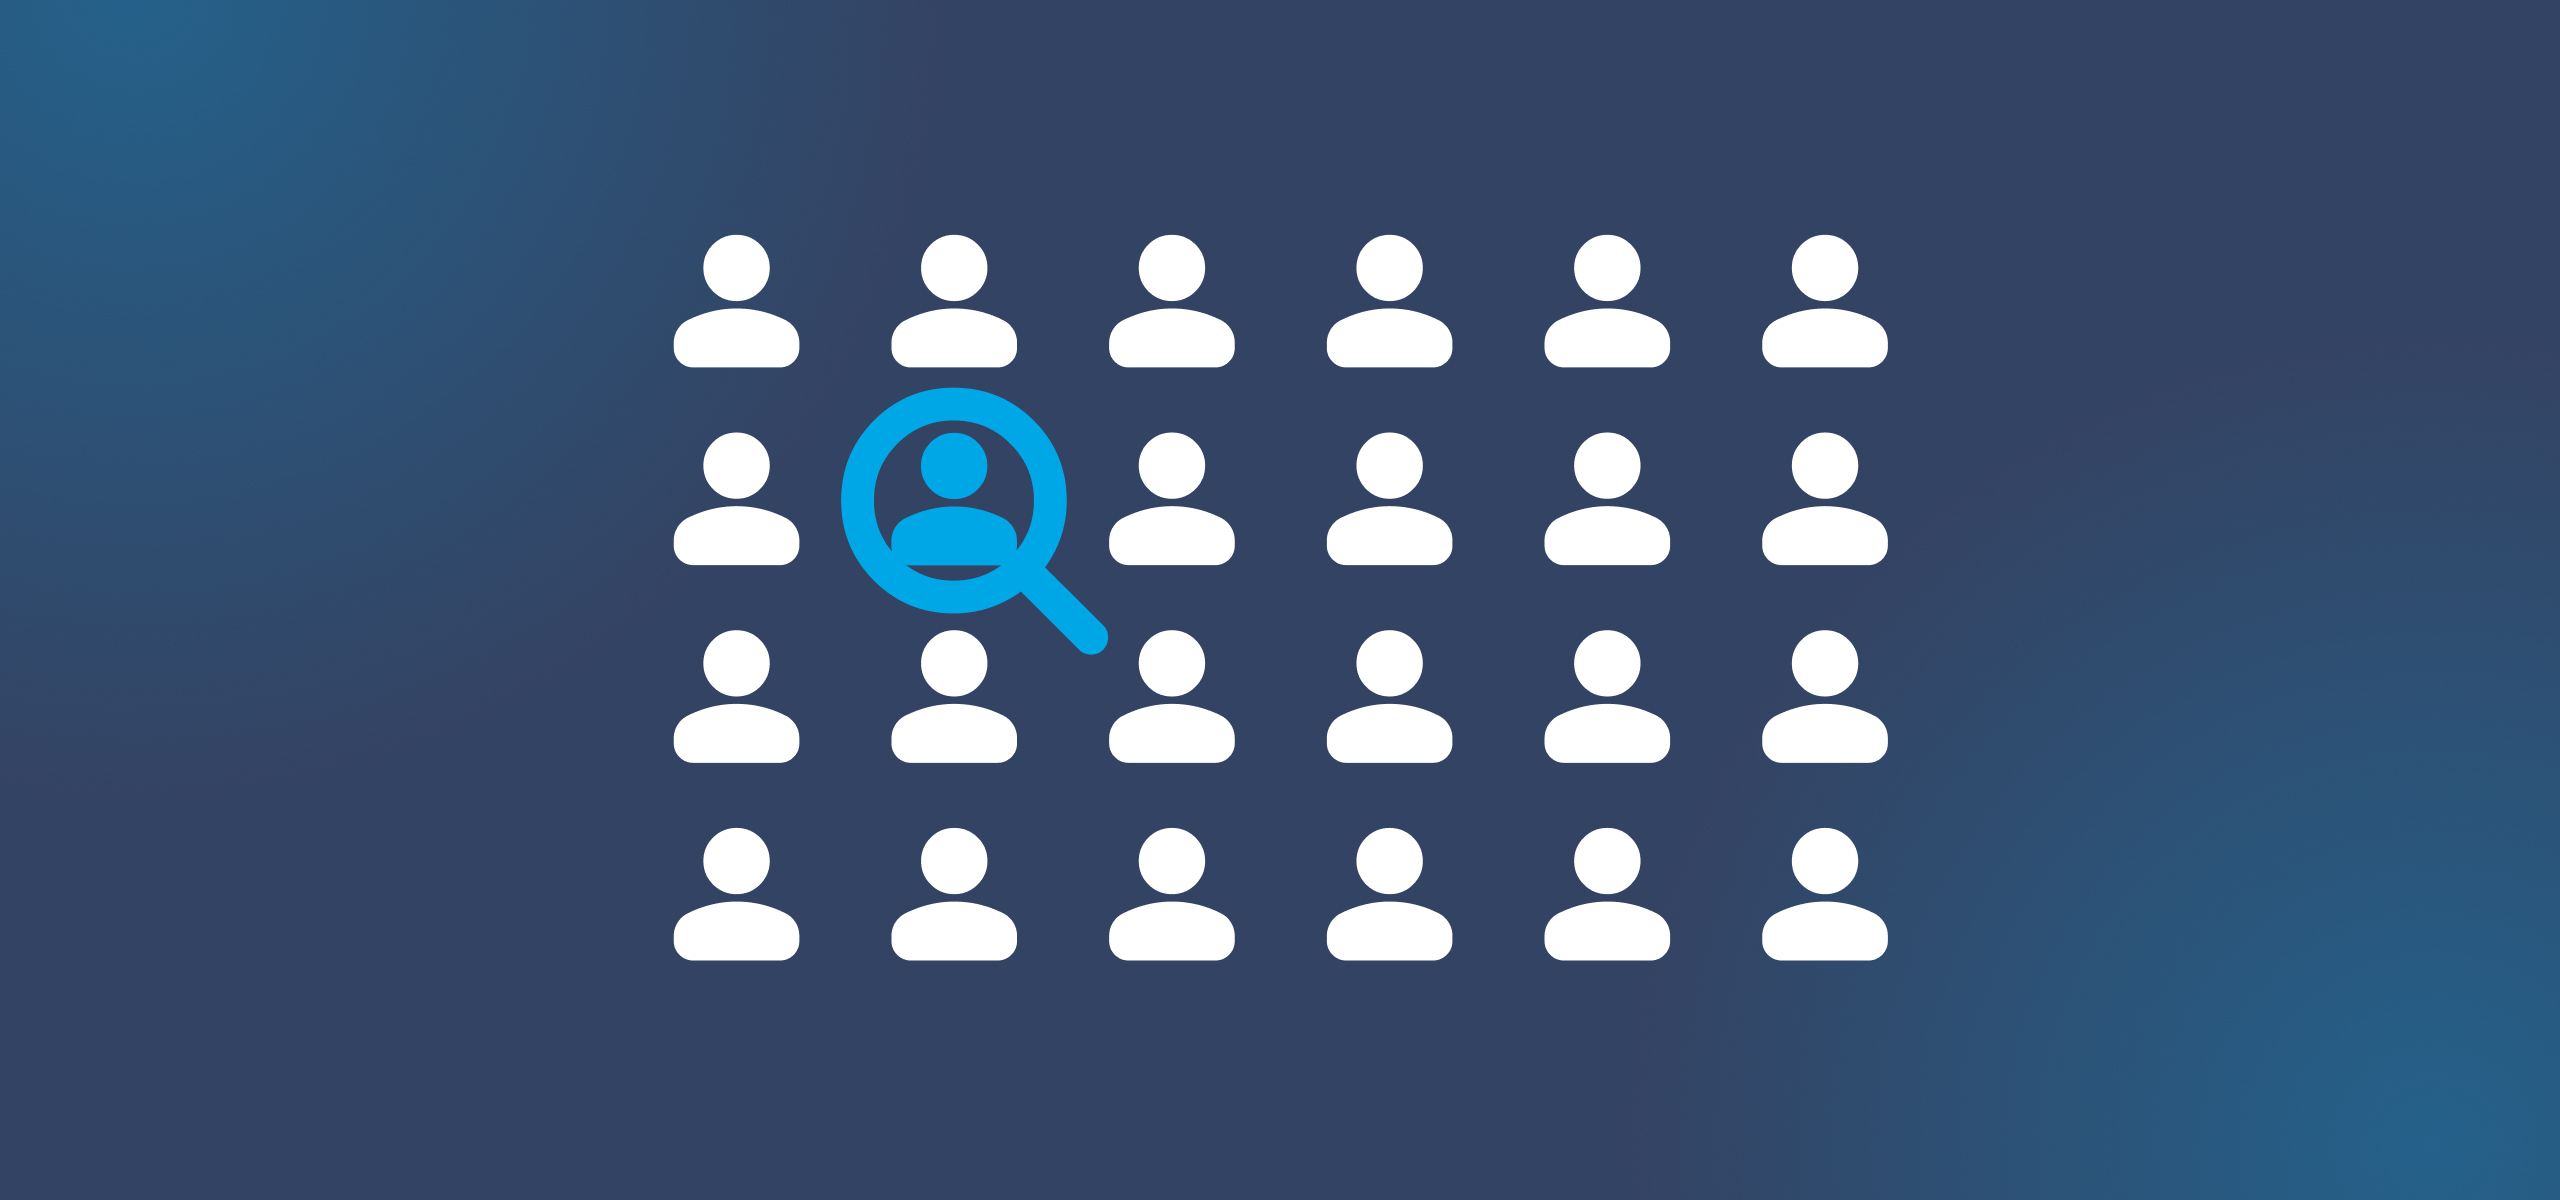 An illustration of many white user icons on a dark blue background with one icon highlighted by a magnifying glass symbol to show how to find a good tenant.